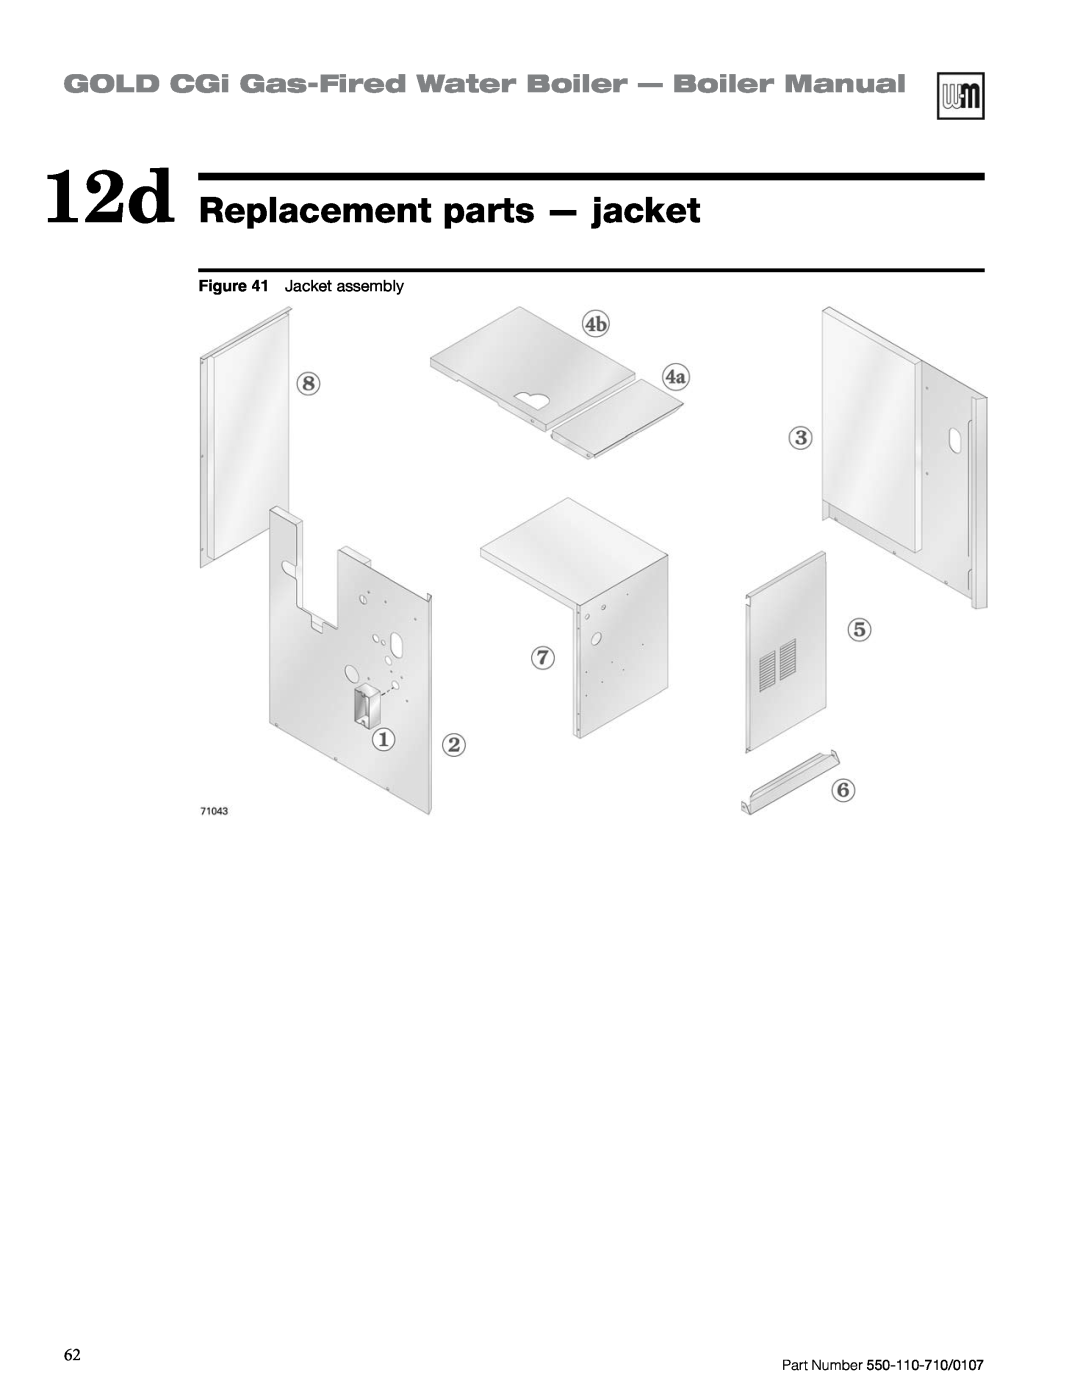 Weil-McLain 550-110-710/0107 manual 12d Replacement parts — jacket, GOLD CGi Gas-FiredWater Boiler — Boiler Manual 